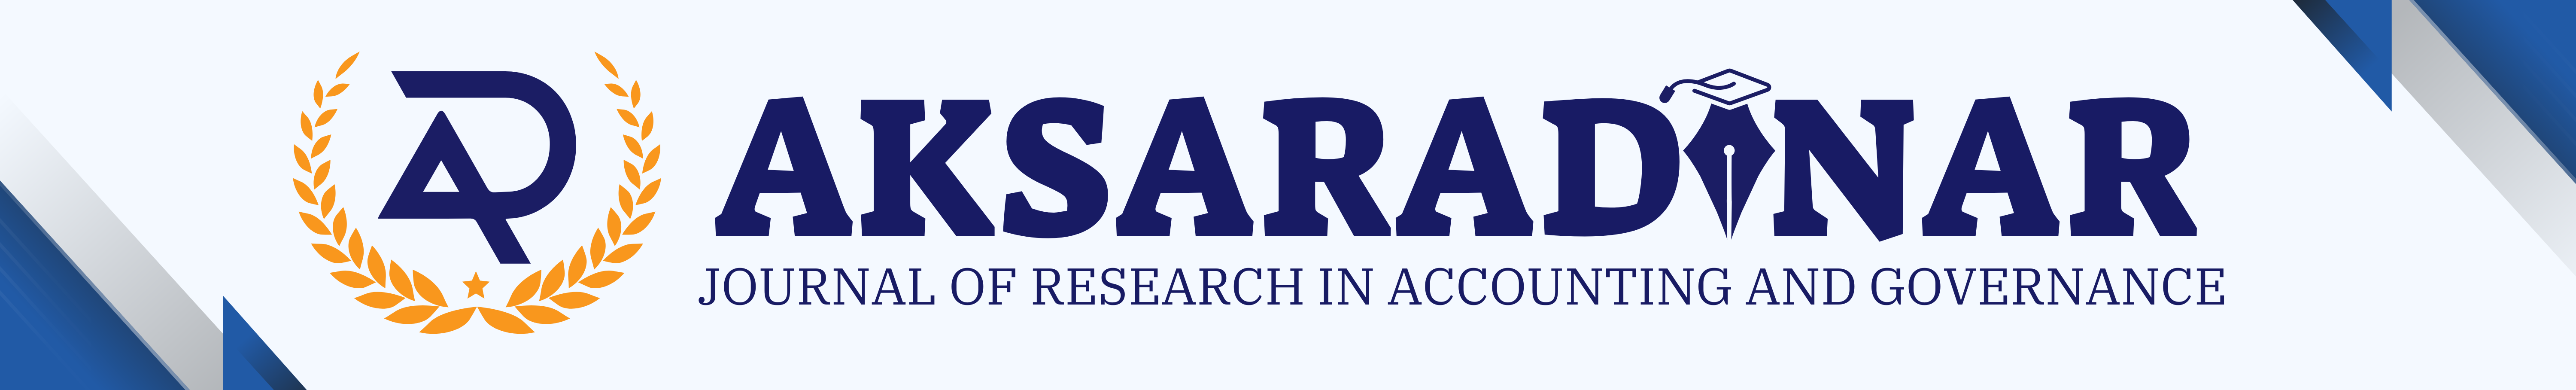 Logo Aksaradinar Journal of Research in Accounting and Governance Institut Agama Islam Negeri Ponorogo